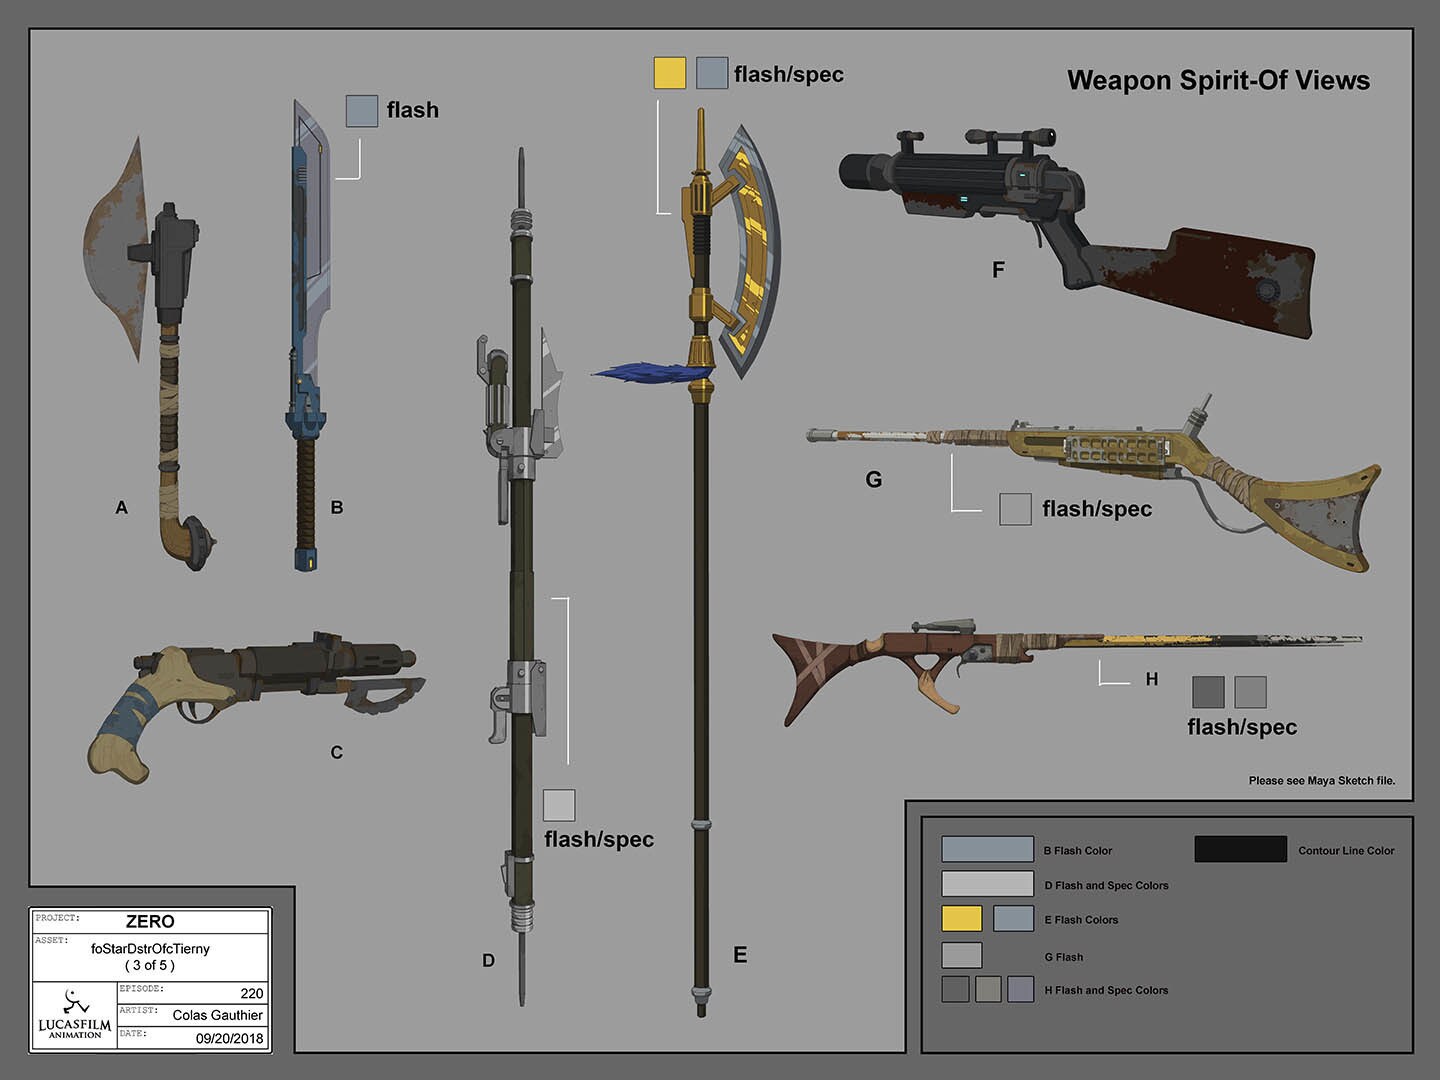  Agent Tierny's weapons by Colas Gauthier